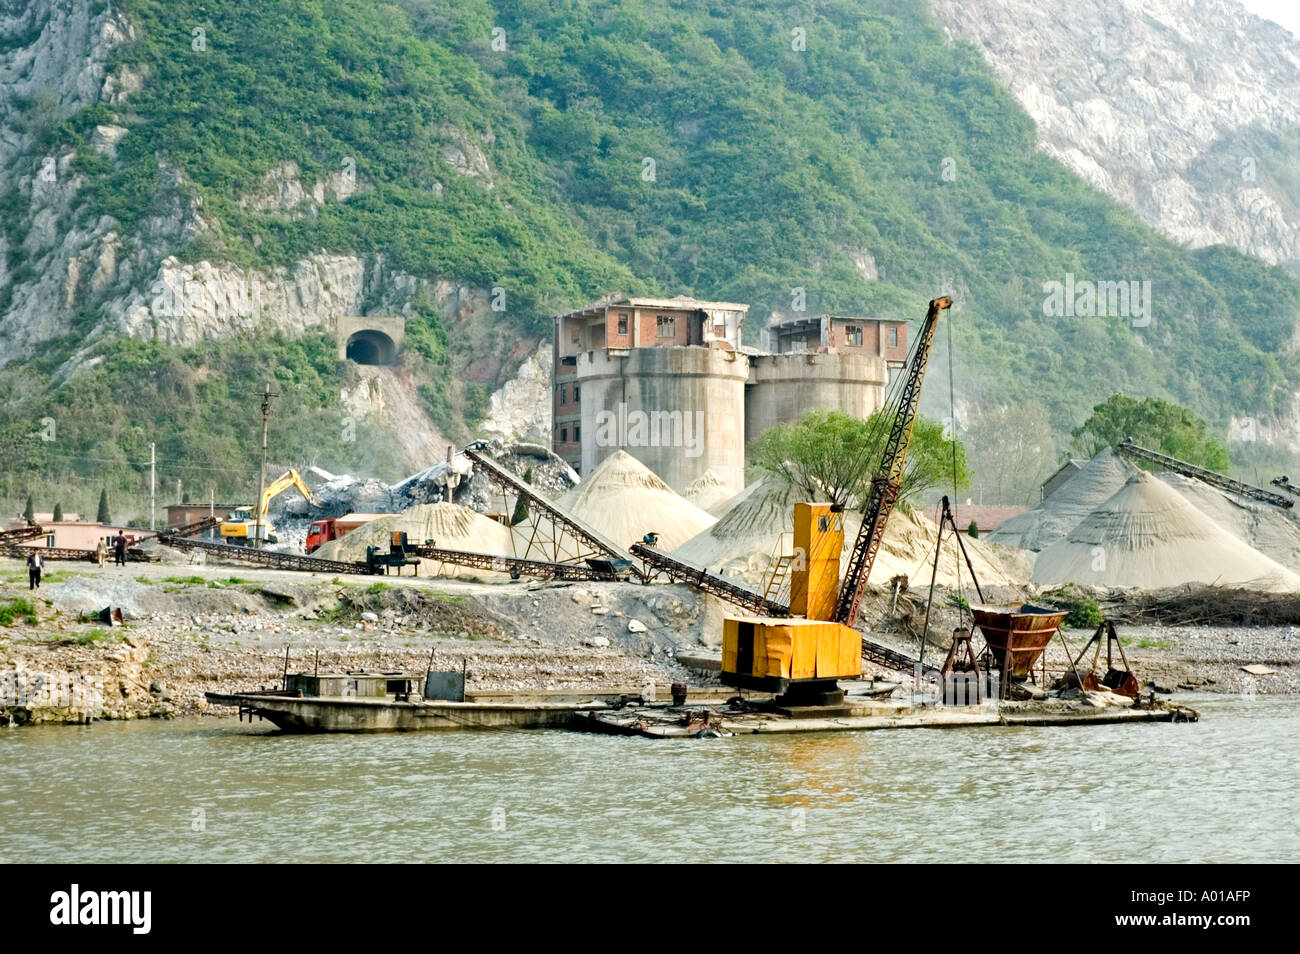 Heaps of crushed construction materials being prepared on the bank of the Yangtze river, Nanjing, China Stock Photo